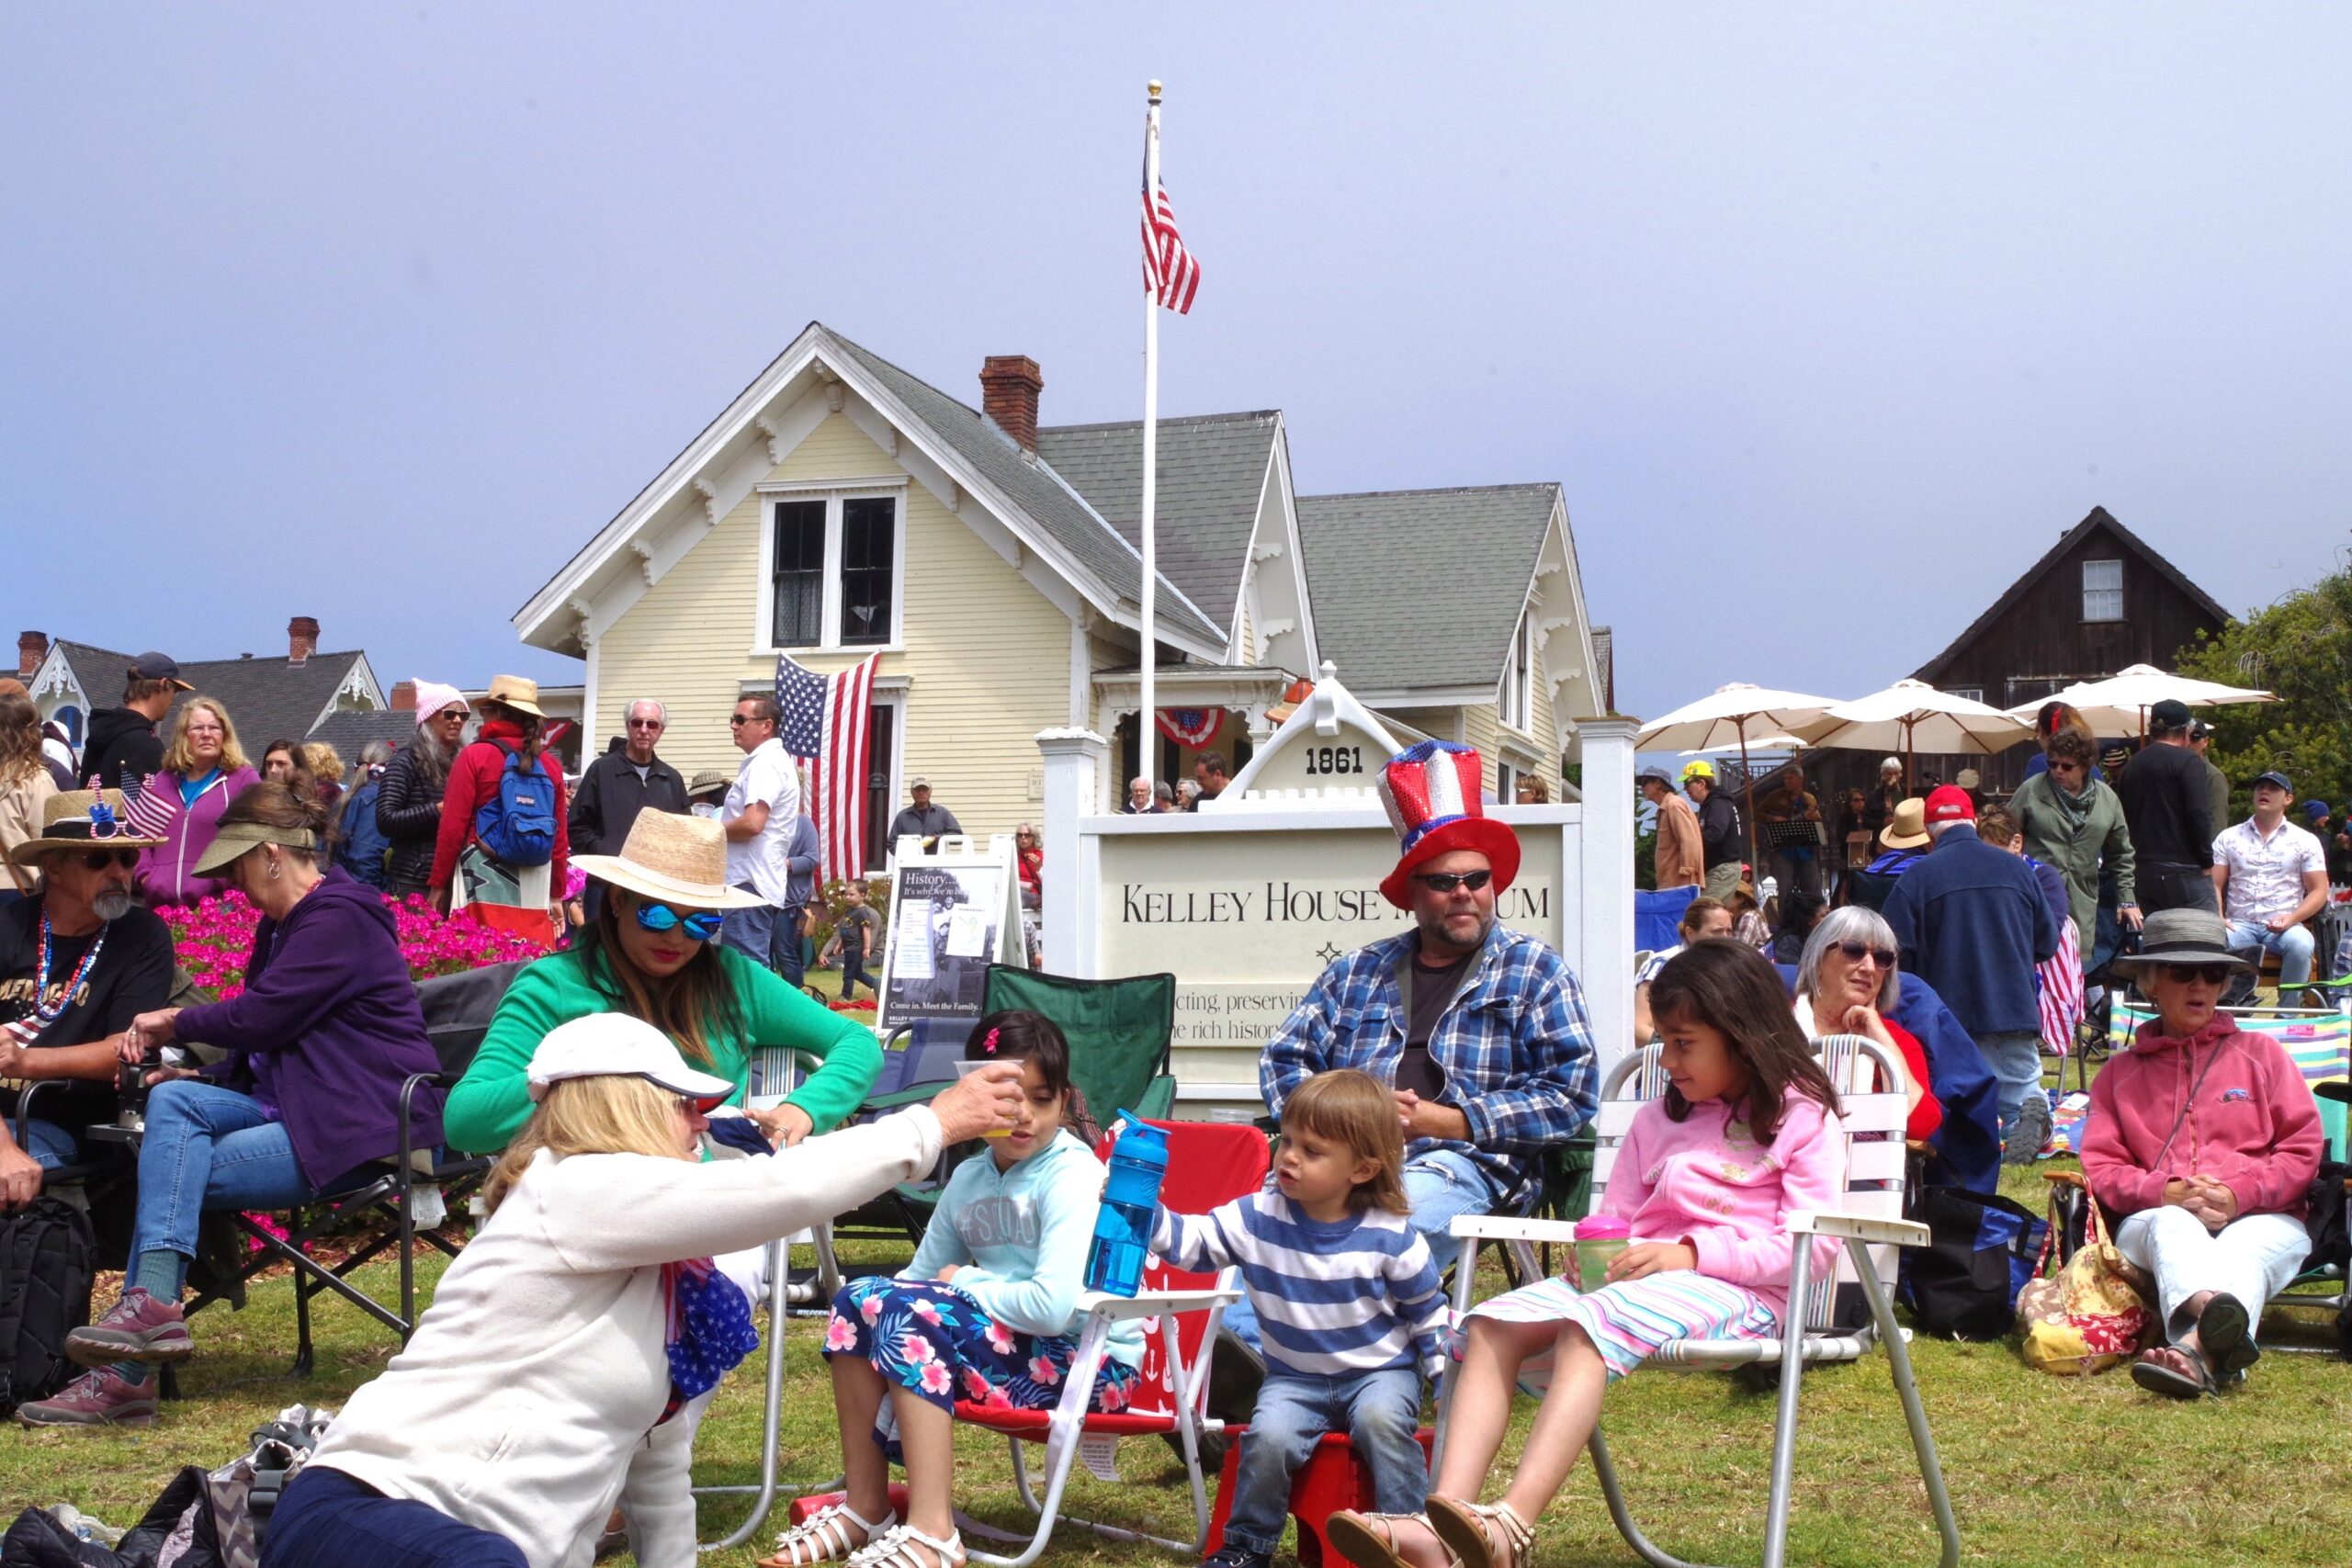 People sitting on a lawn with the Kelley House Museum and sign behind them